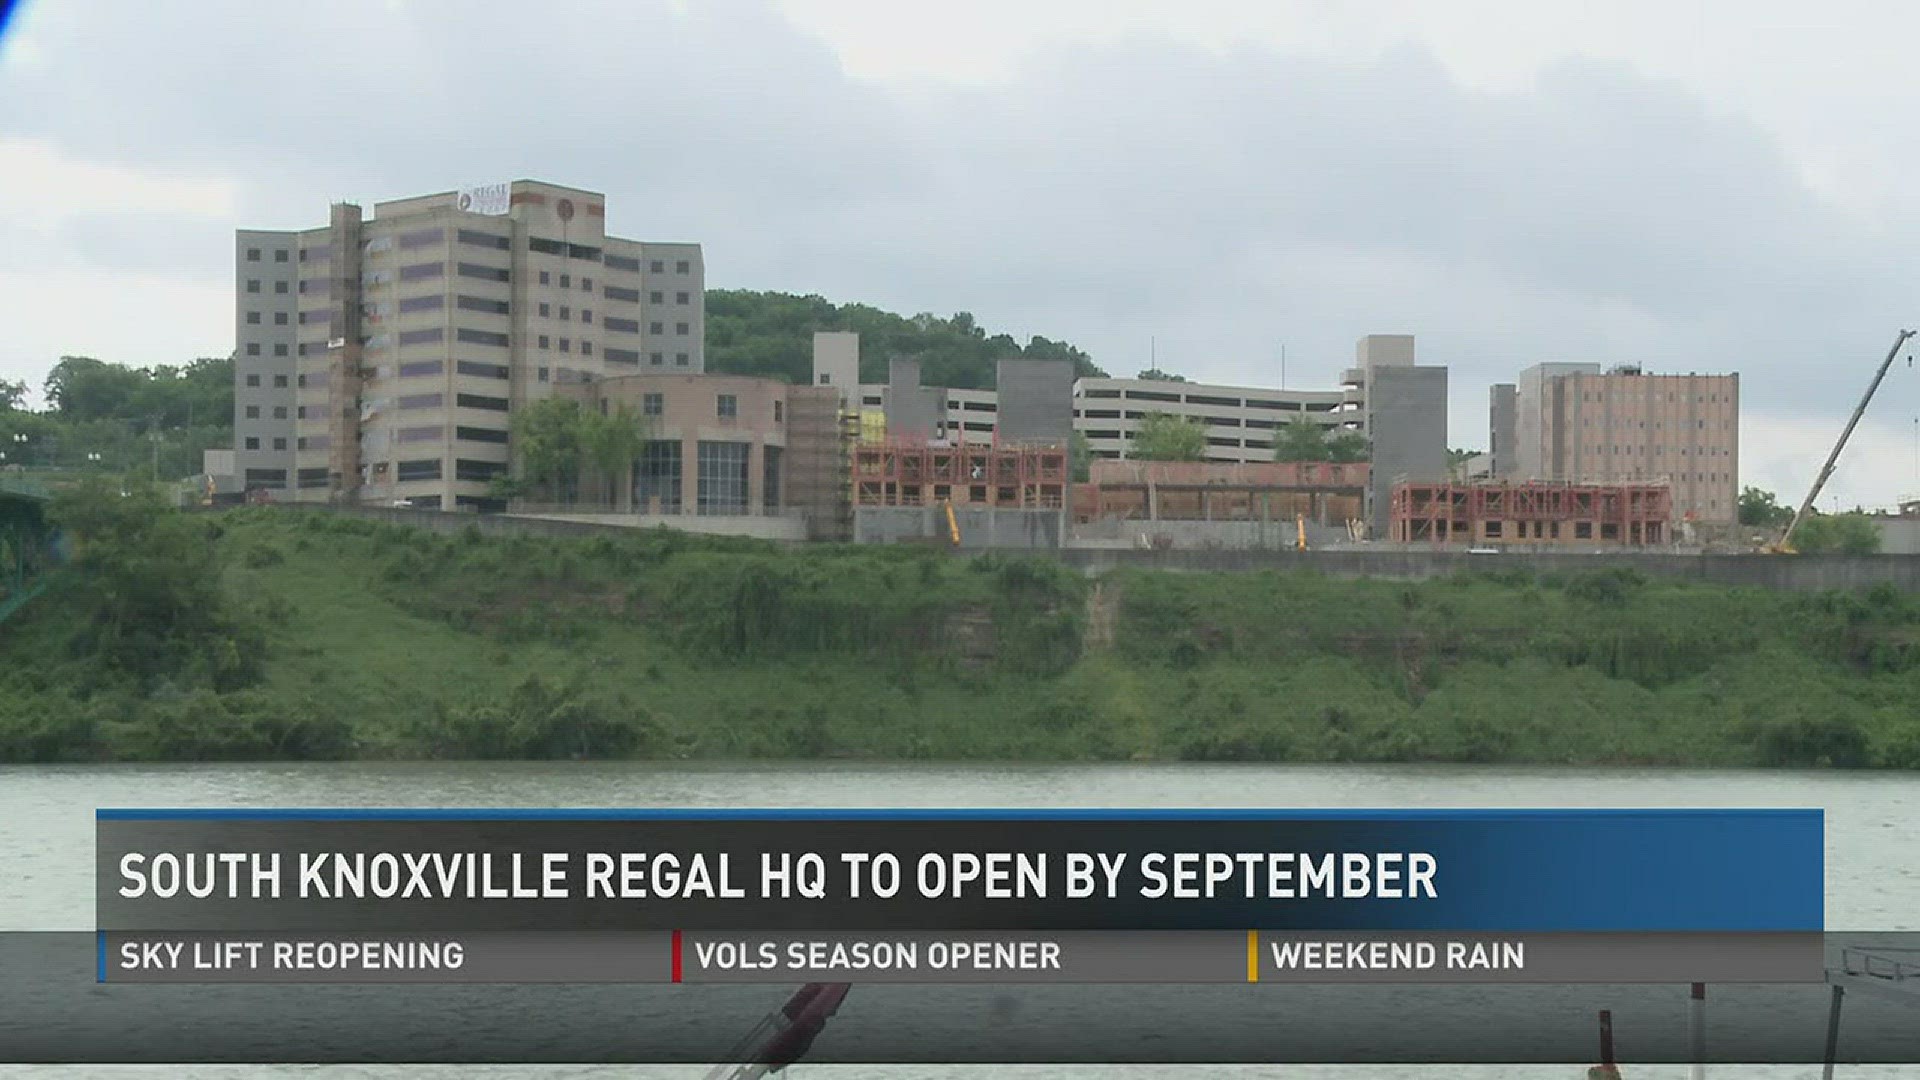 The South Knoxville waterfront is being transformed, with Regal Entertainment's headquarters almost finished and work well underway on a luxury apartment complex and riverwalk.